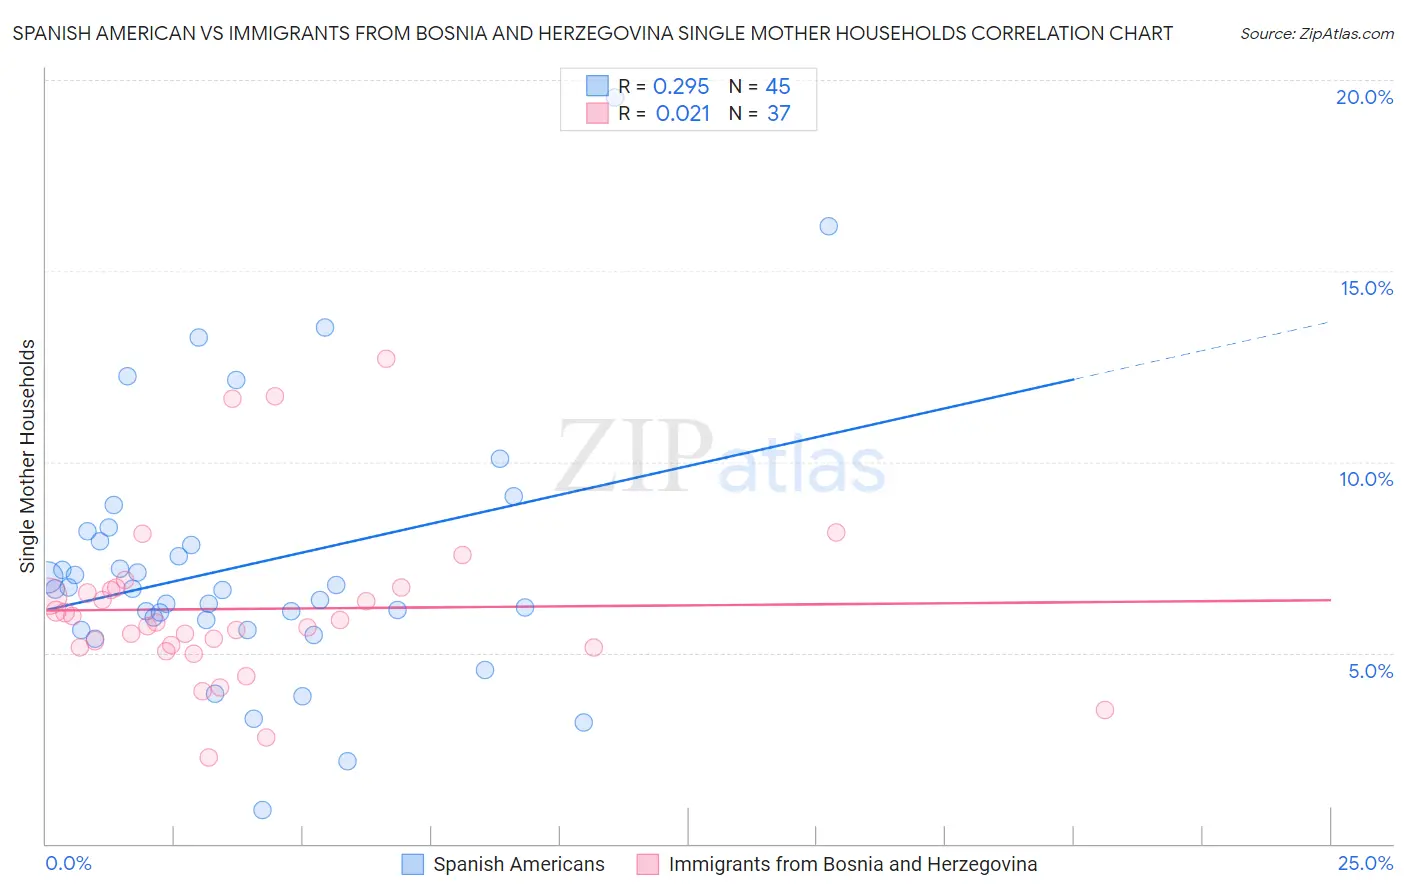 Spanish American vs Immigrants from Bosnia and Herzegovina Single Mother Households